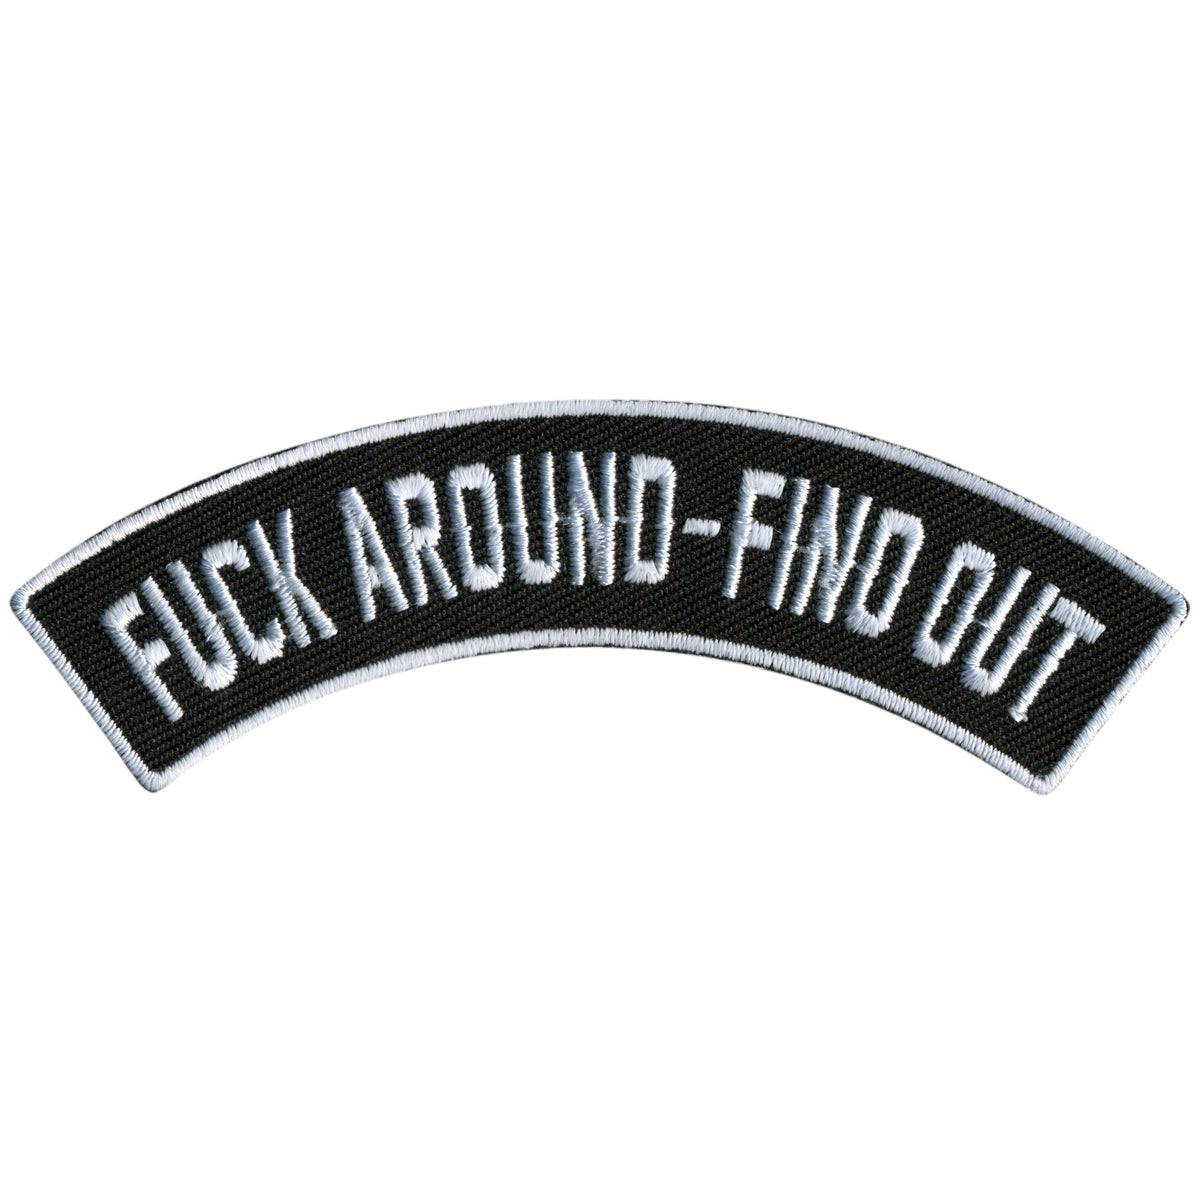 Hot Leathers F*** Around- Find Out 4” X 1” Top Rocker Patch